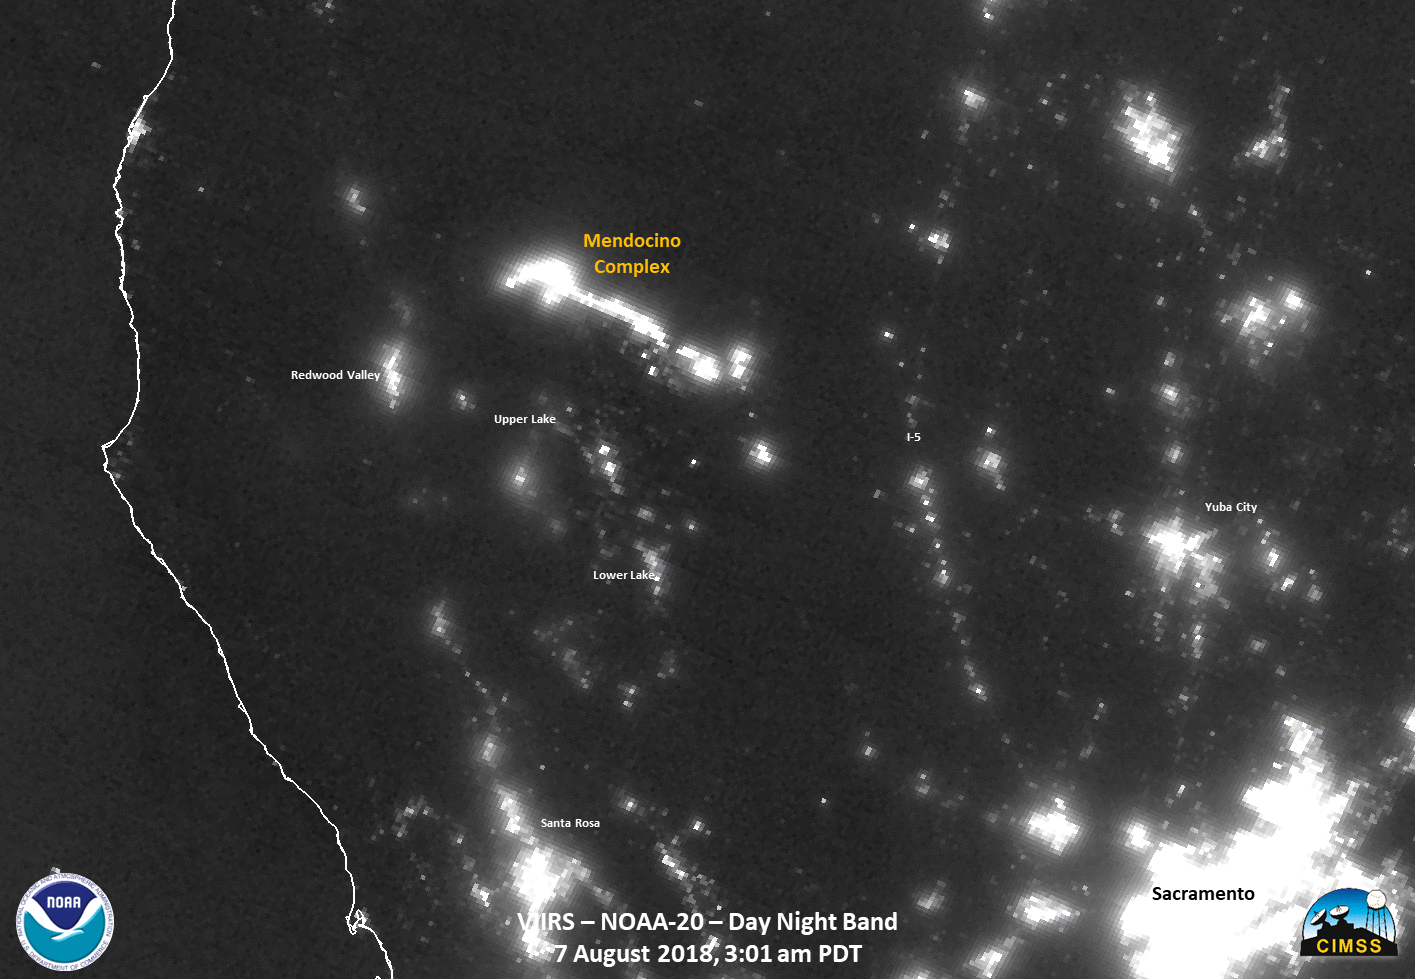 NOAA-20 VIIRS Day/Night Band (0.7 µm), Near-Infrared (1.61 µm and 2.25 µm) and Shortwave Infrared (3.75 µm) images [click to enlarge]